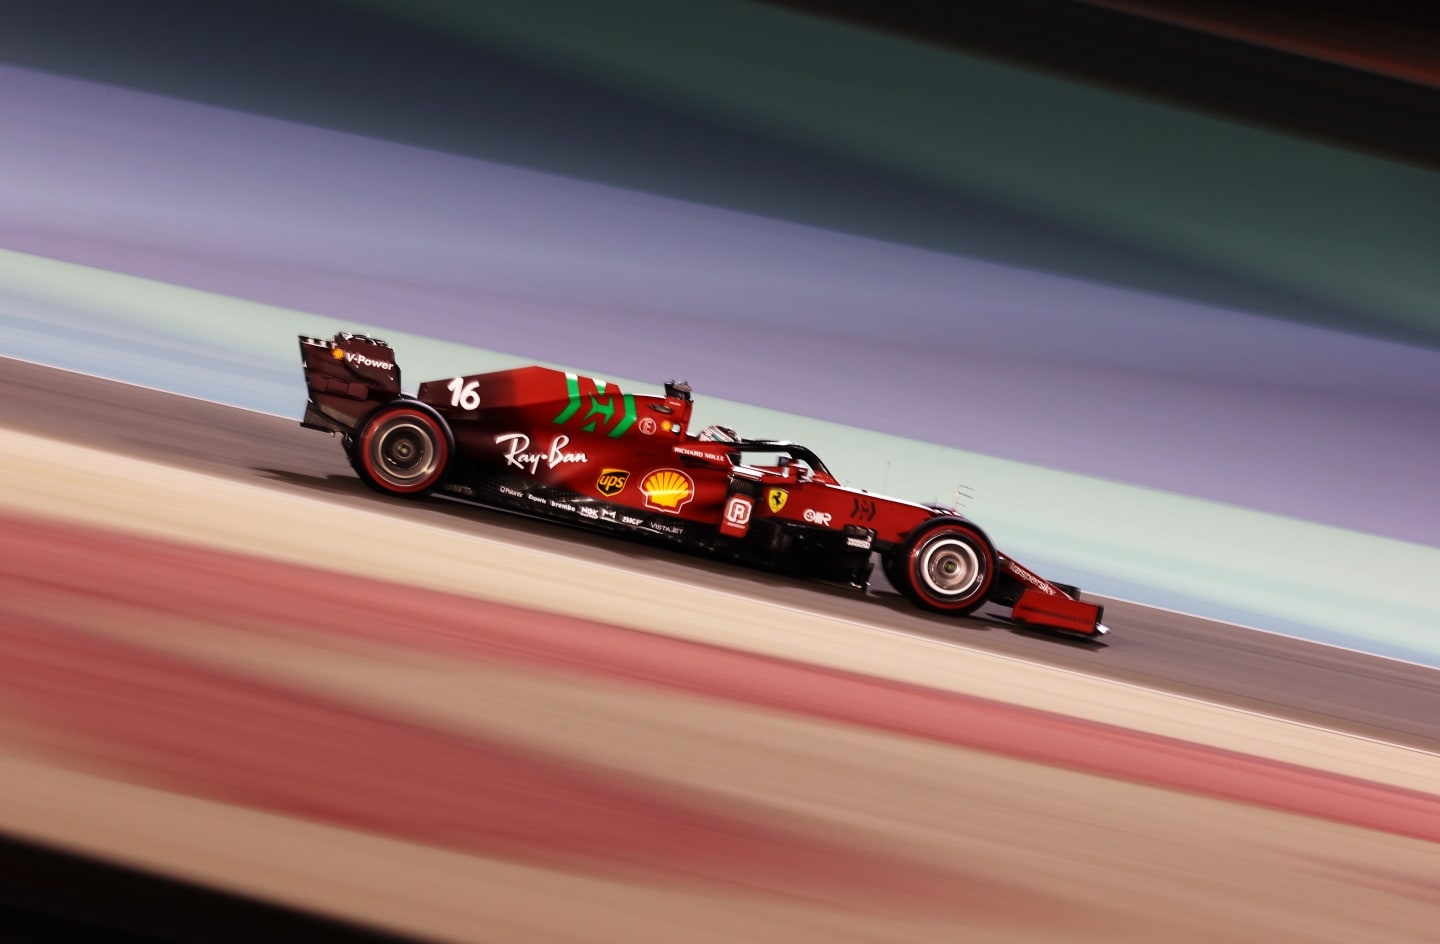 BAHRAIN, BAHRAIN - MARCH 26: Charles Leclerc of Monaco driving the (16) Scuderia Ferrari SF21 on track during practice ahead of the F1 Grand Prix of Bahrain at Bahrain International Circuit on March 26, 2021 in Bahrain, Bahrain. (Photo by Lars Baron/Getty Images)